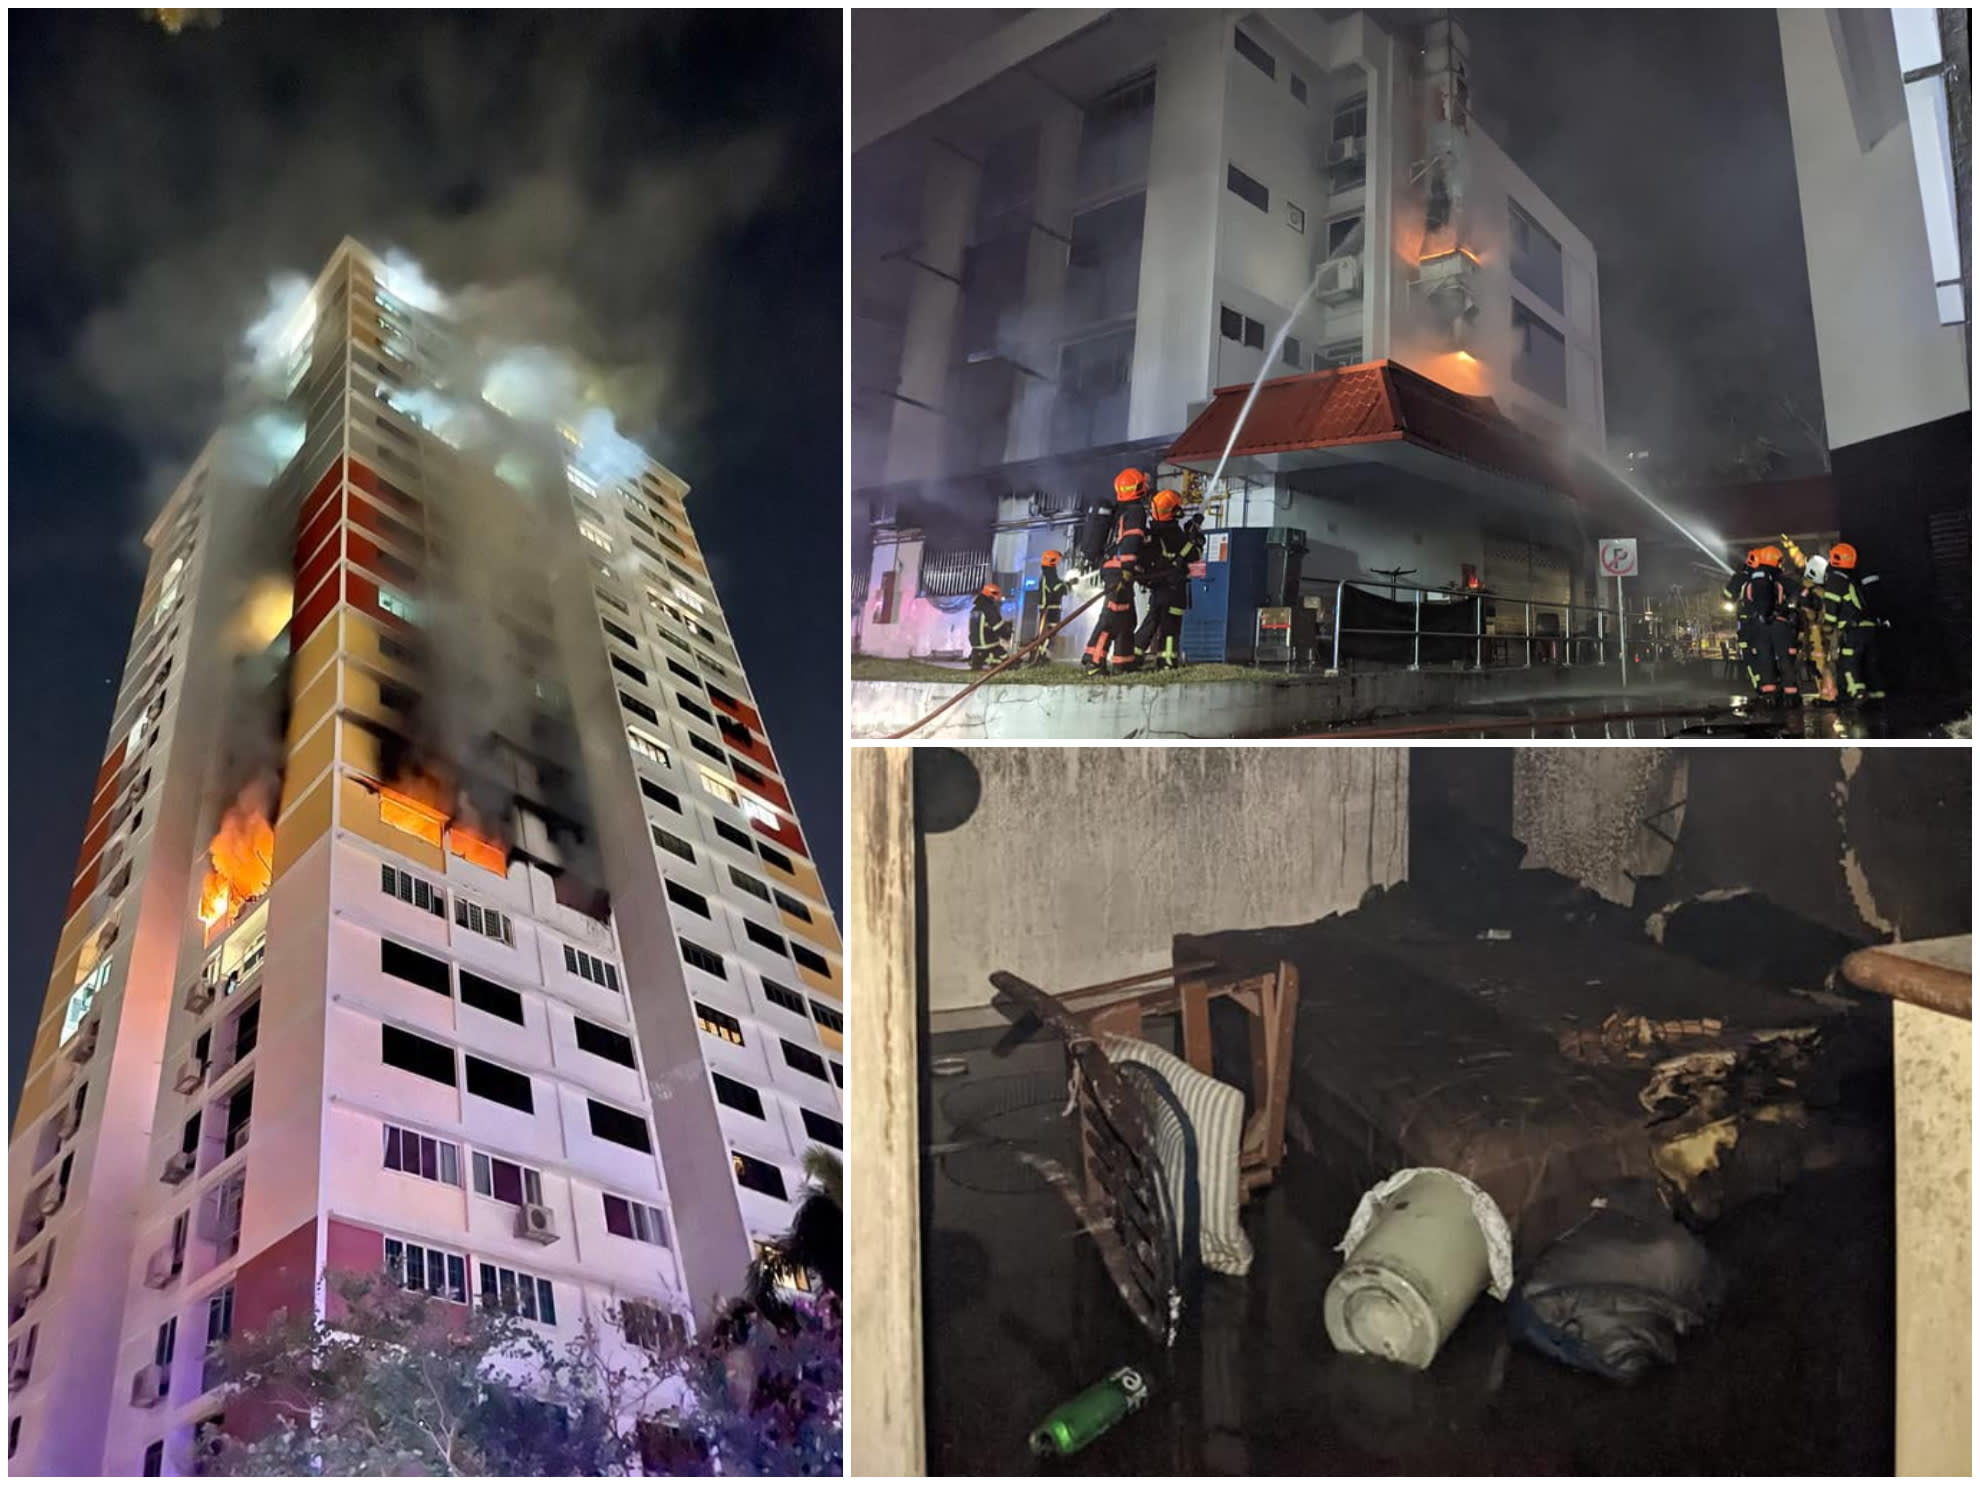 Fires at 3 separate public housing blocks overnight; 3 people taken to hospital